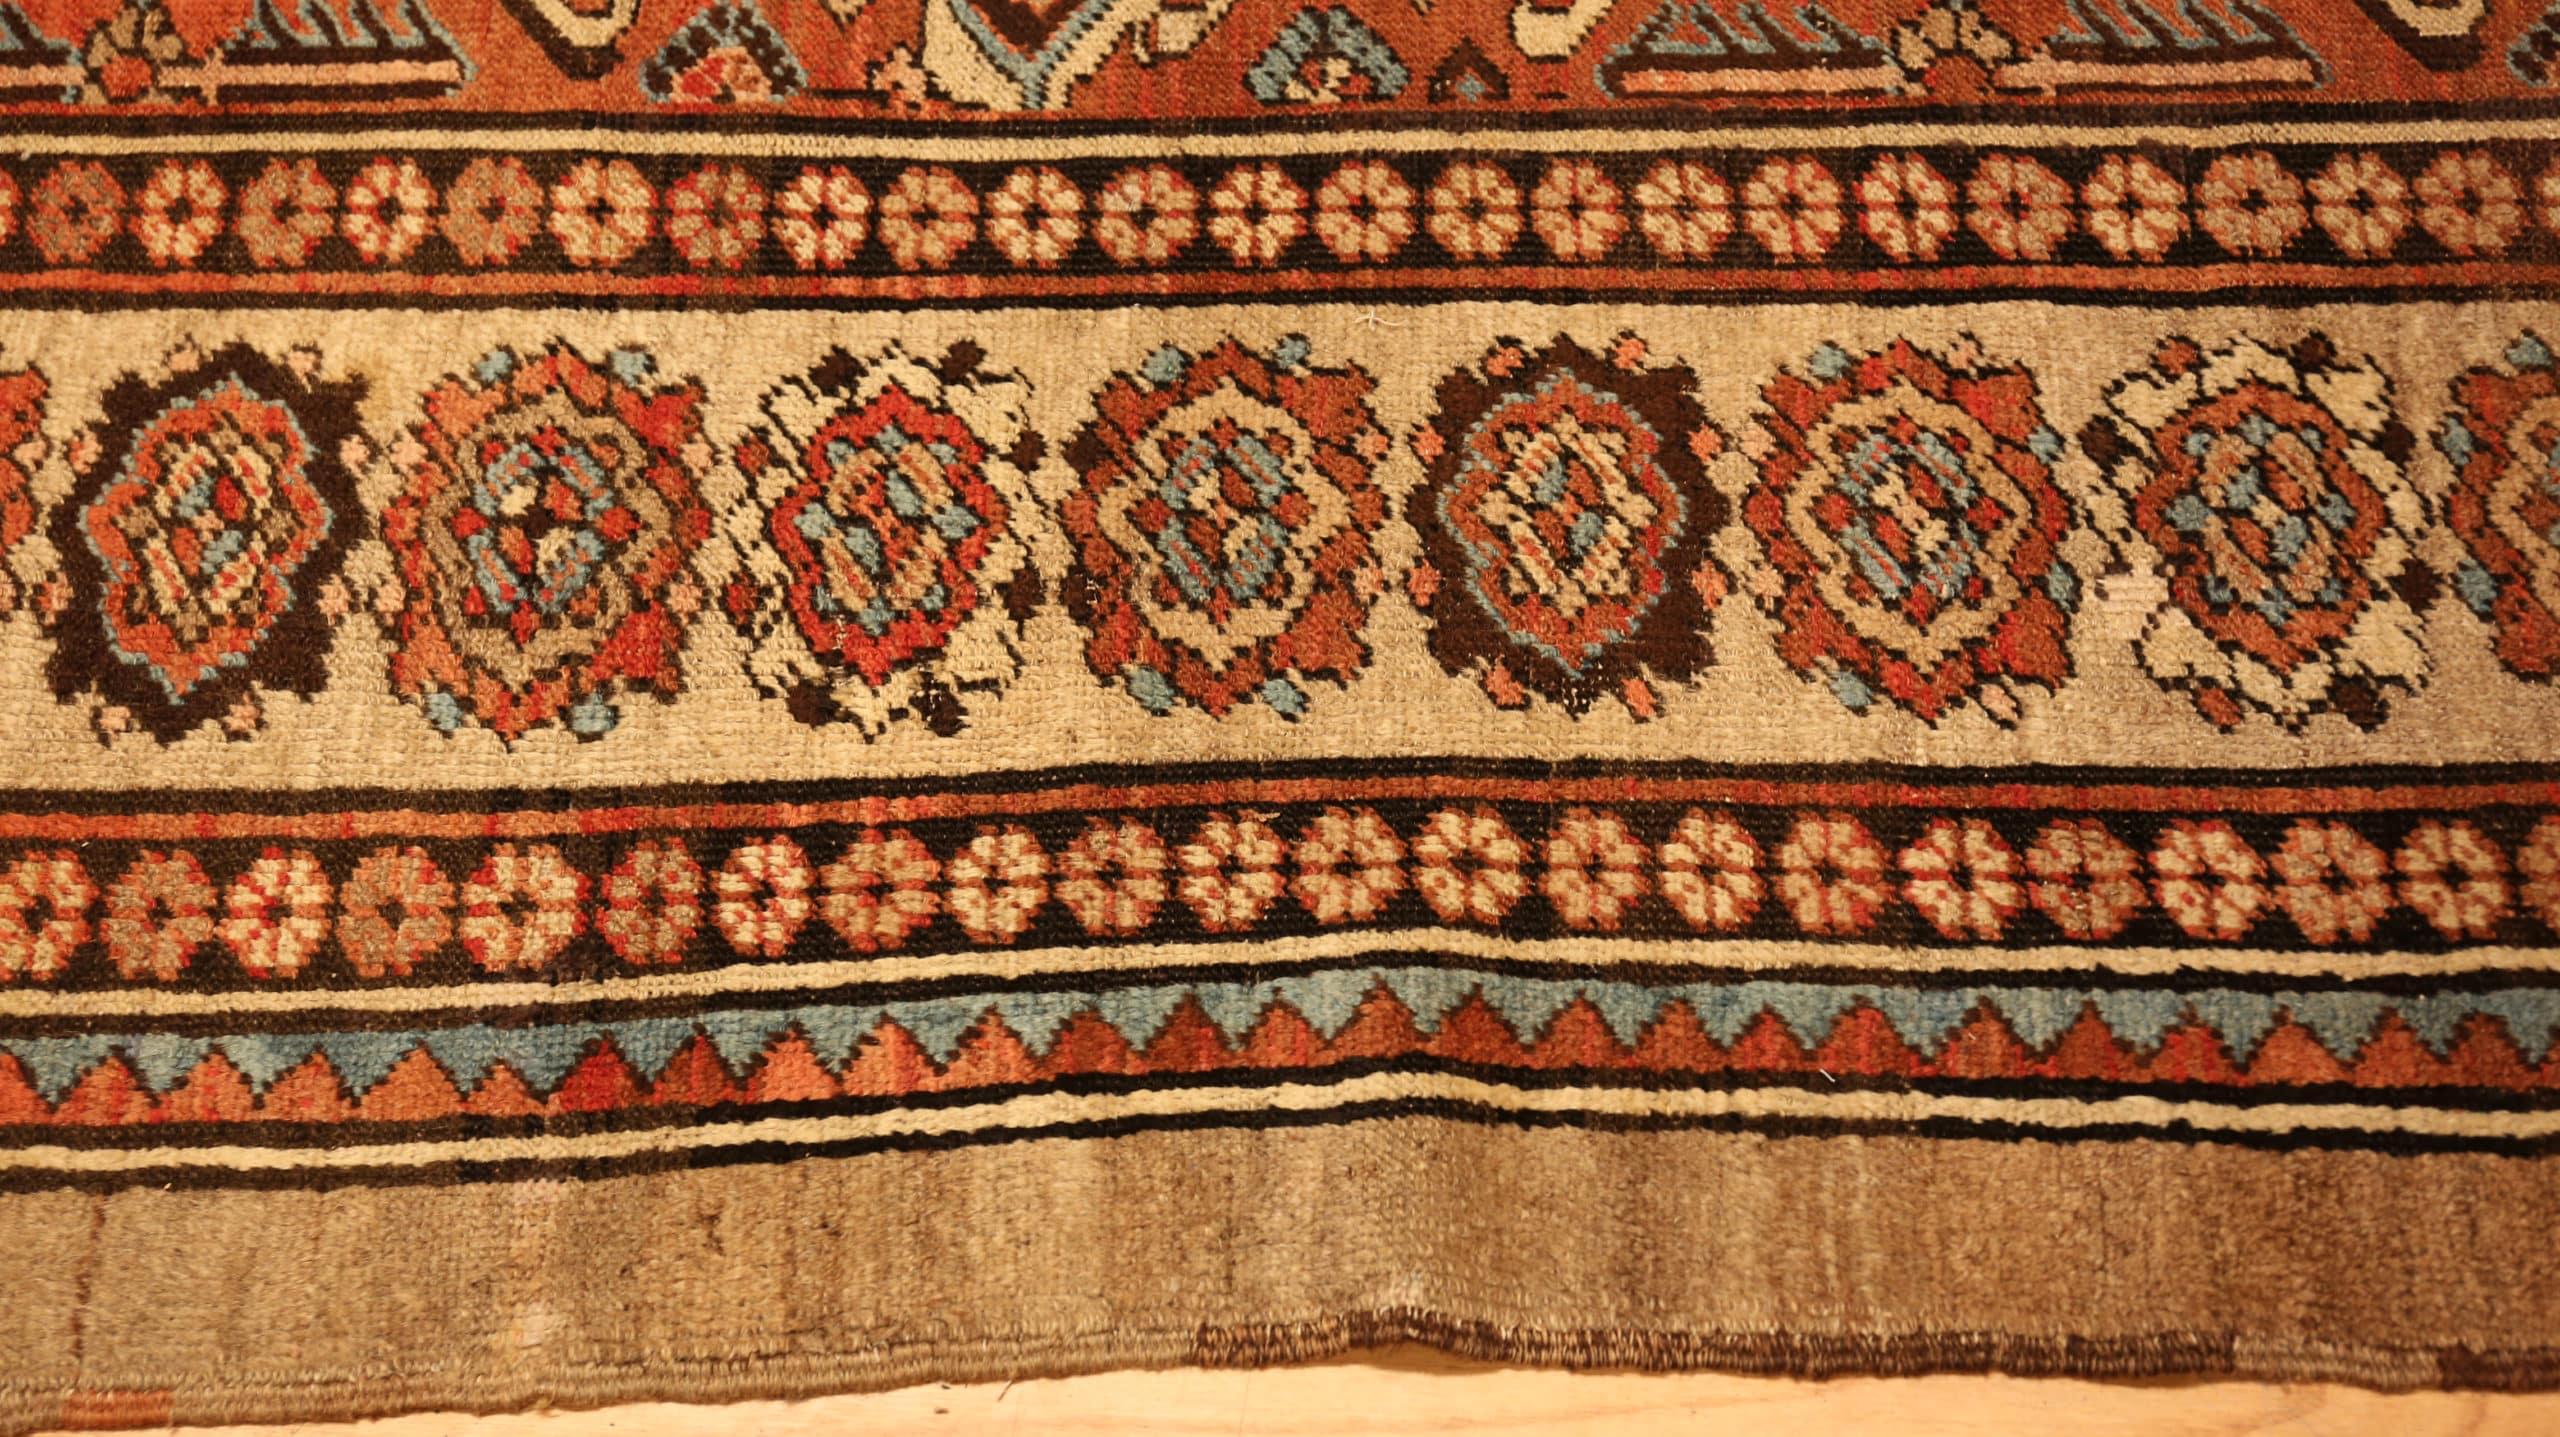 Antique Persian Bakshaish Rug, Country of Origin / rug type: Persian rug, Circa date: 1880. Size: 10 ft 10 in x 14 ft 1 in (3.3 m x 4.29 m)



